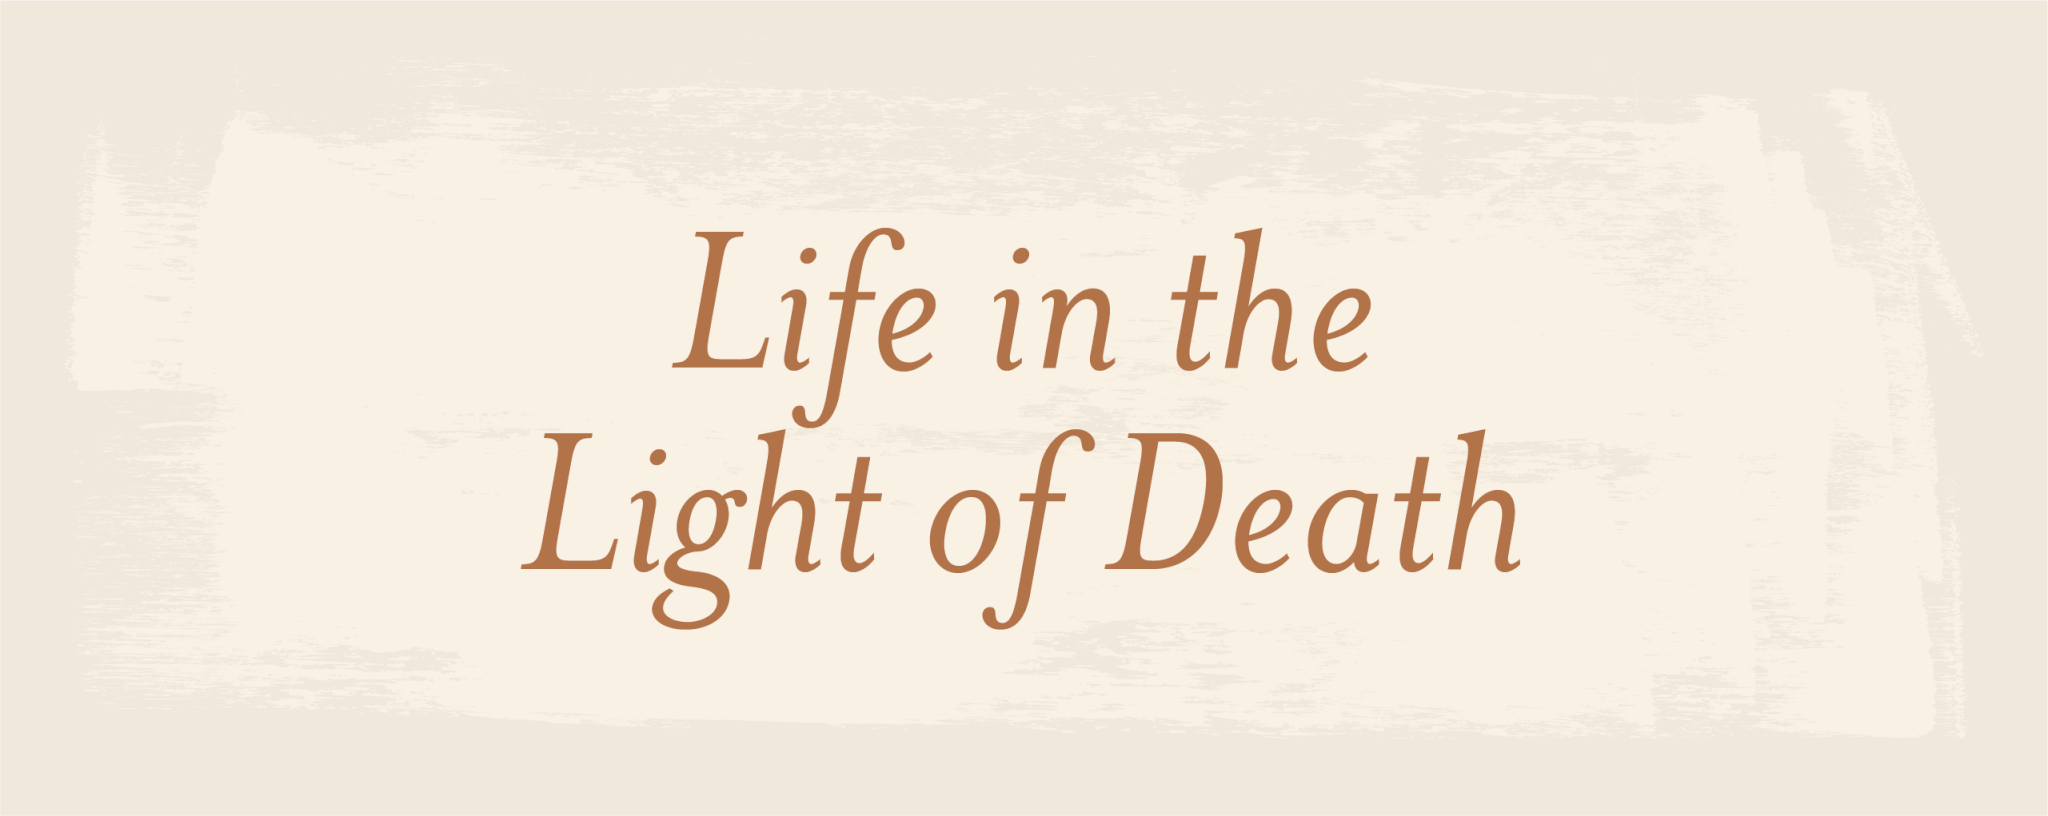 Life in the Light of Death - Laity Lodge